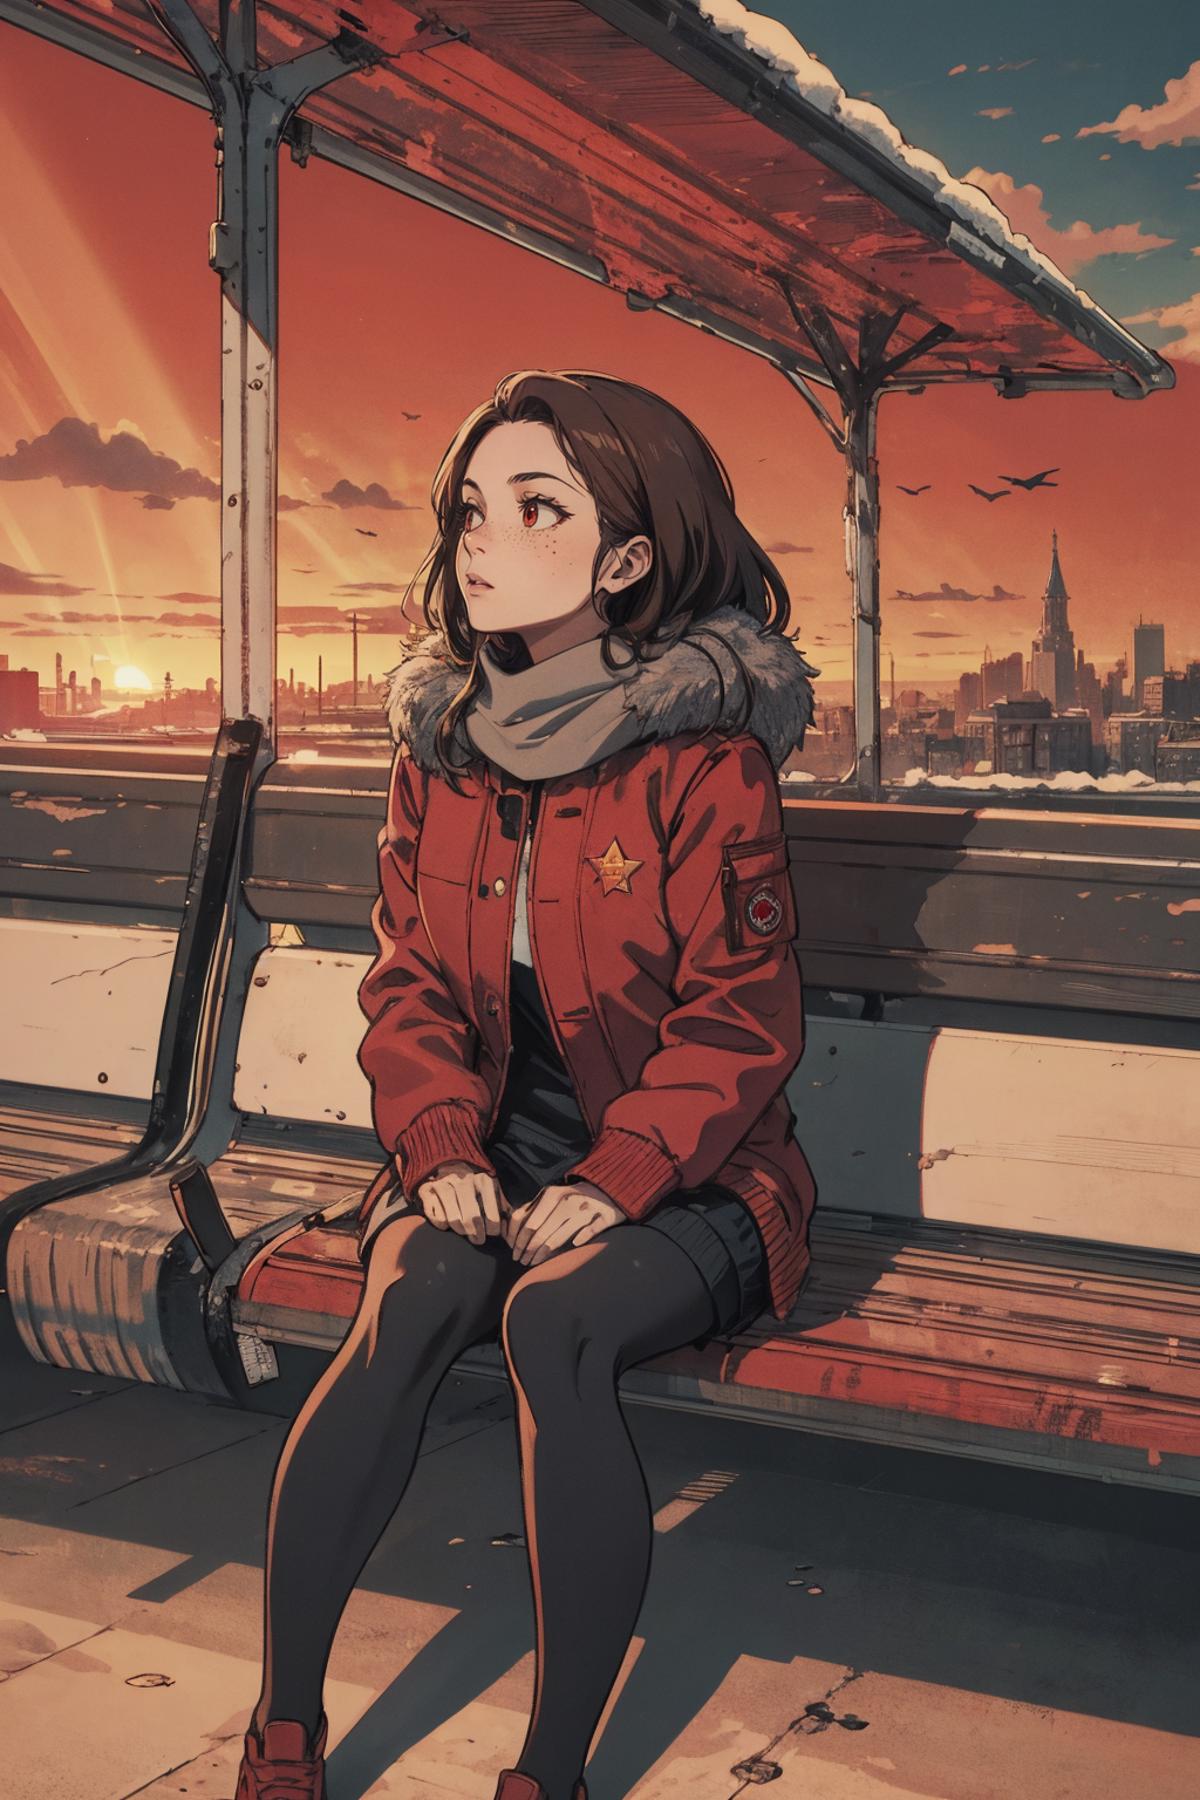 A woman in a red jacket sitting on a bench overlooking a city.